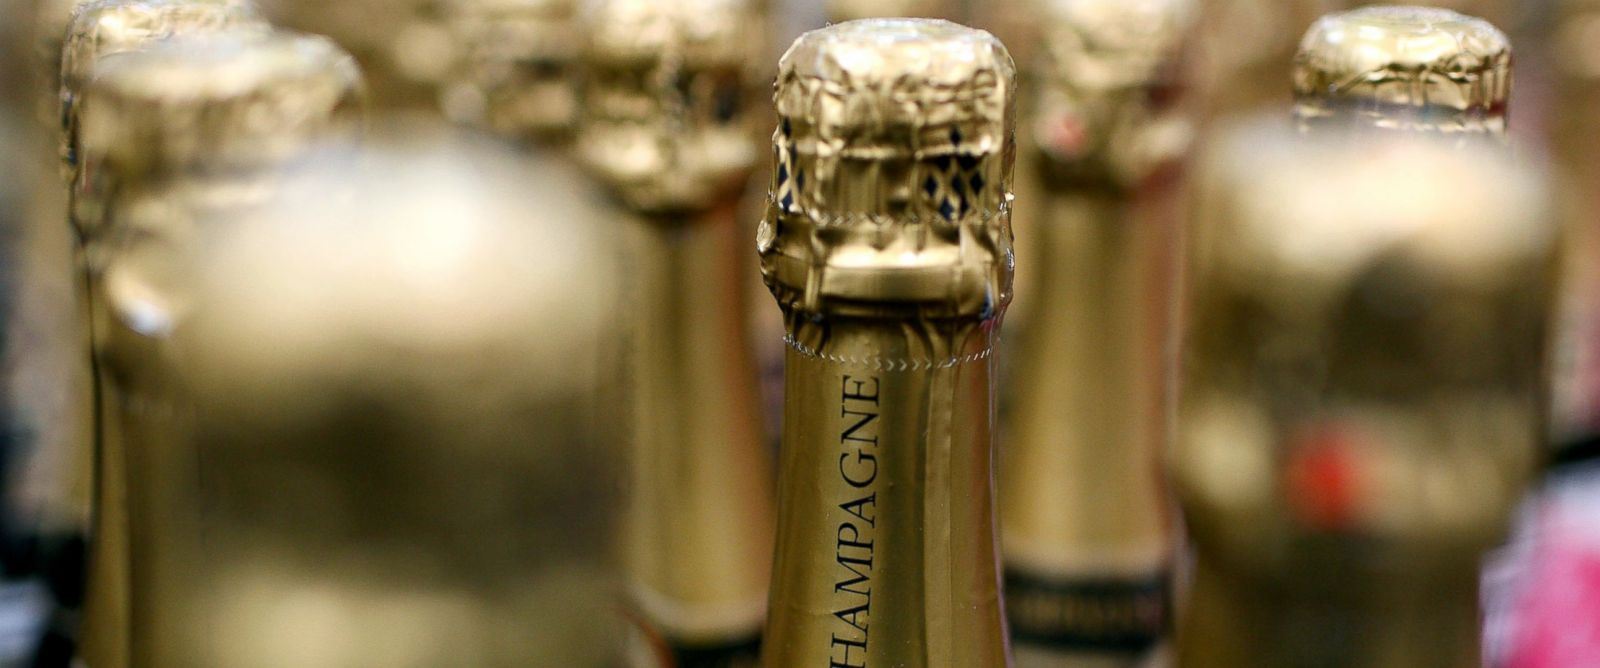 How to Settle on Prosecco or Champagne for 2014 New Year's Eve - ABC News